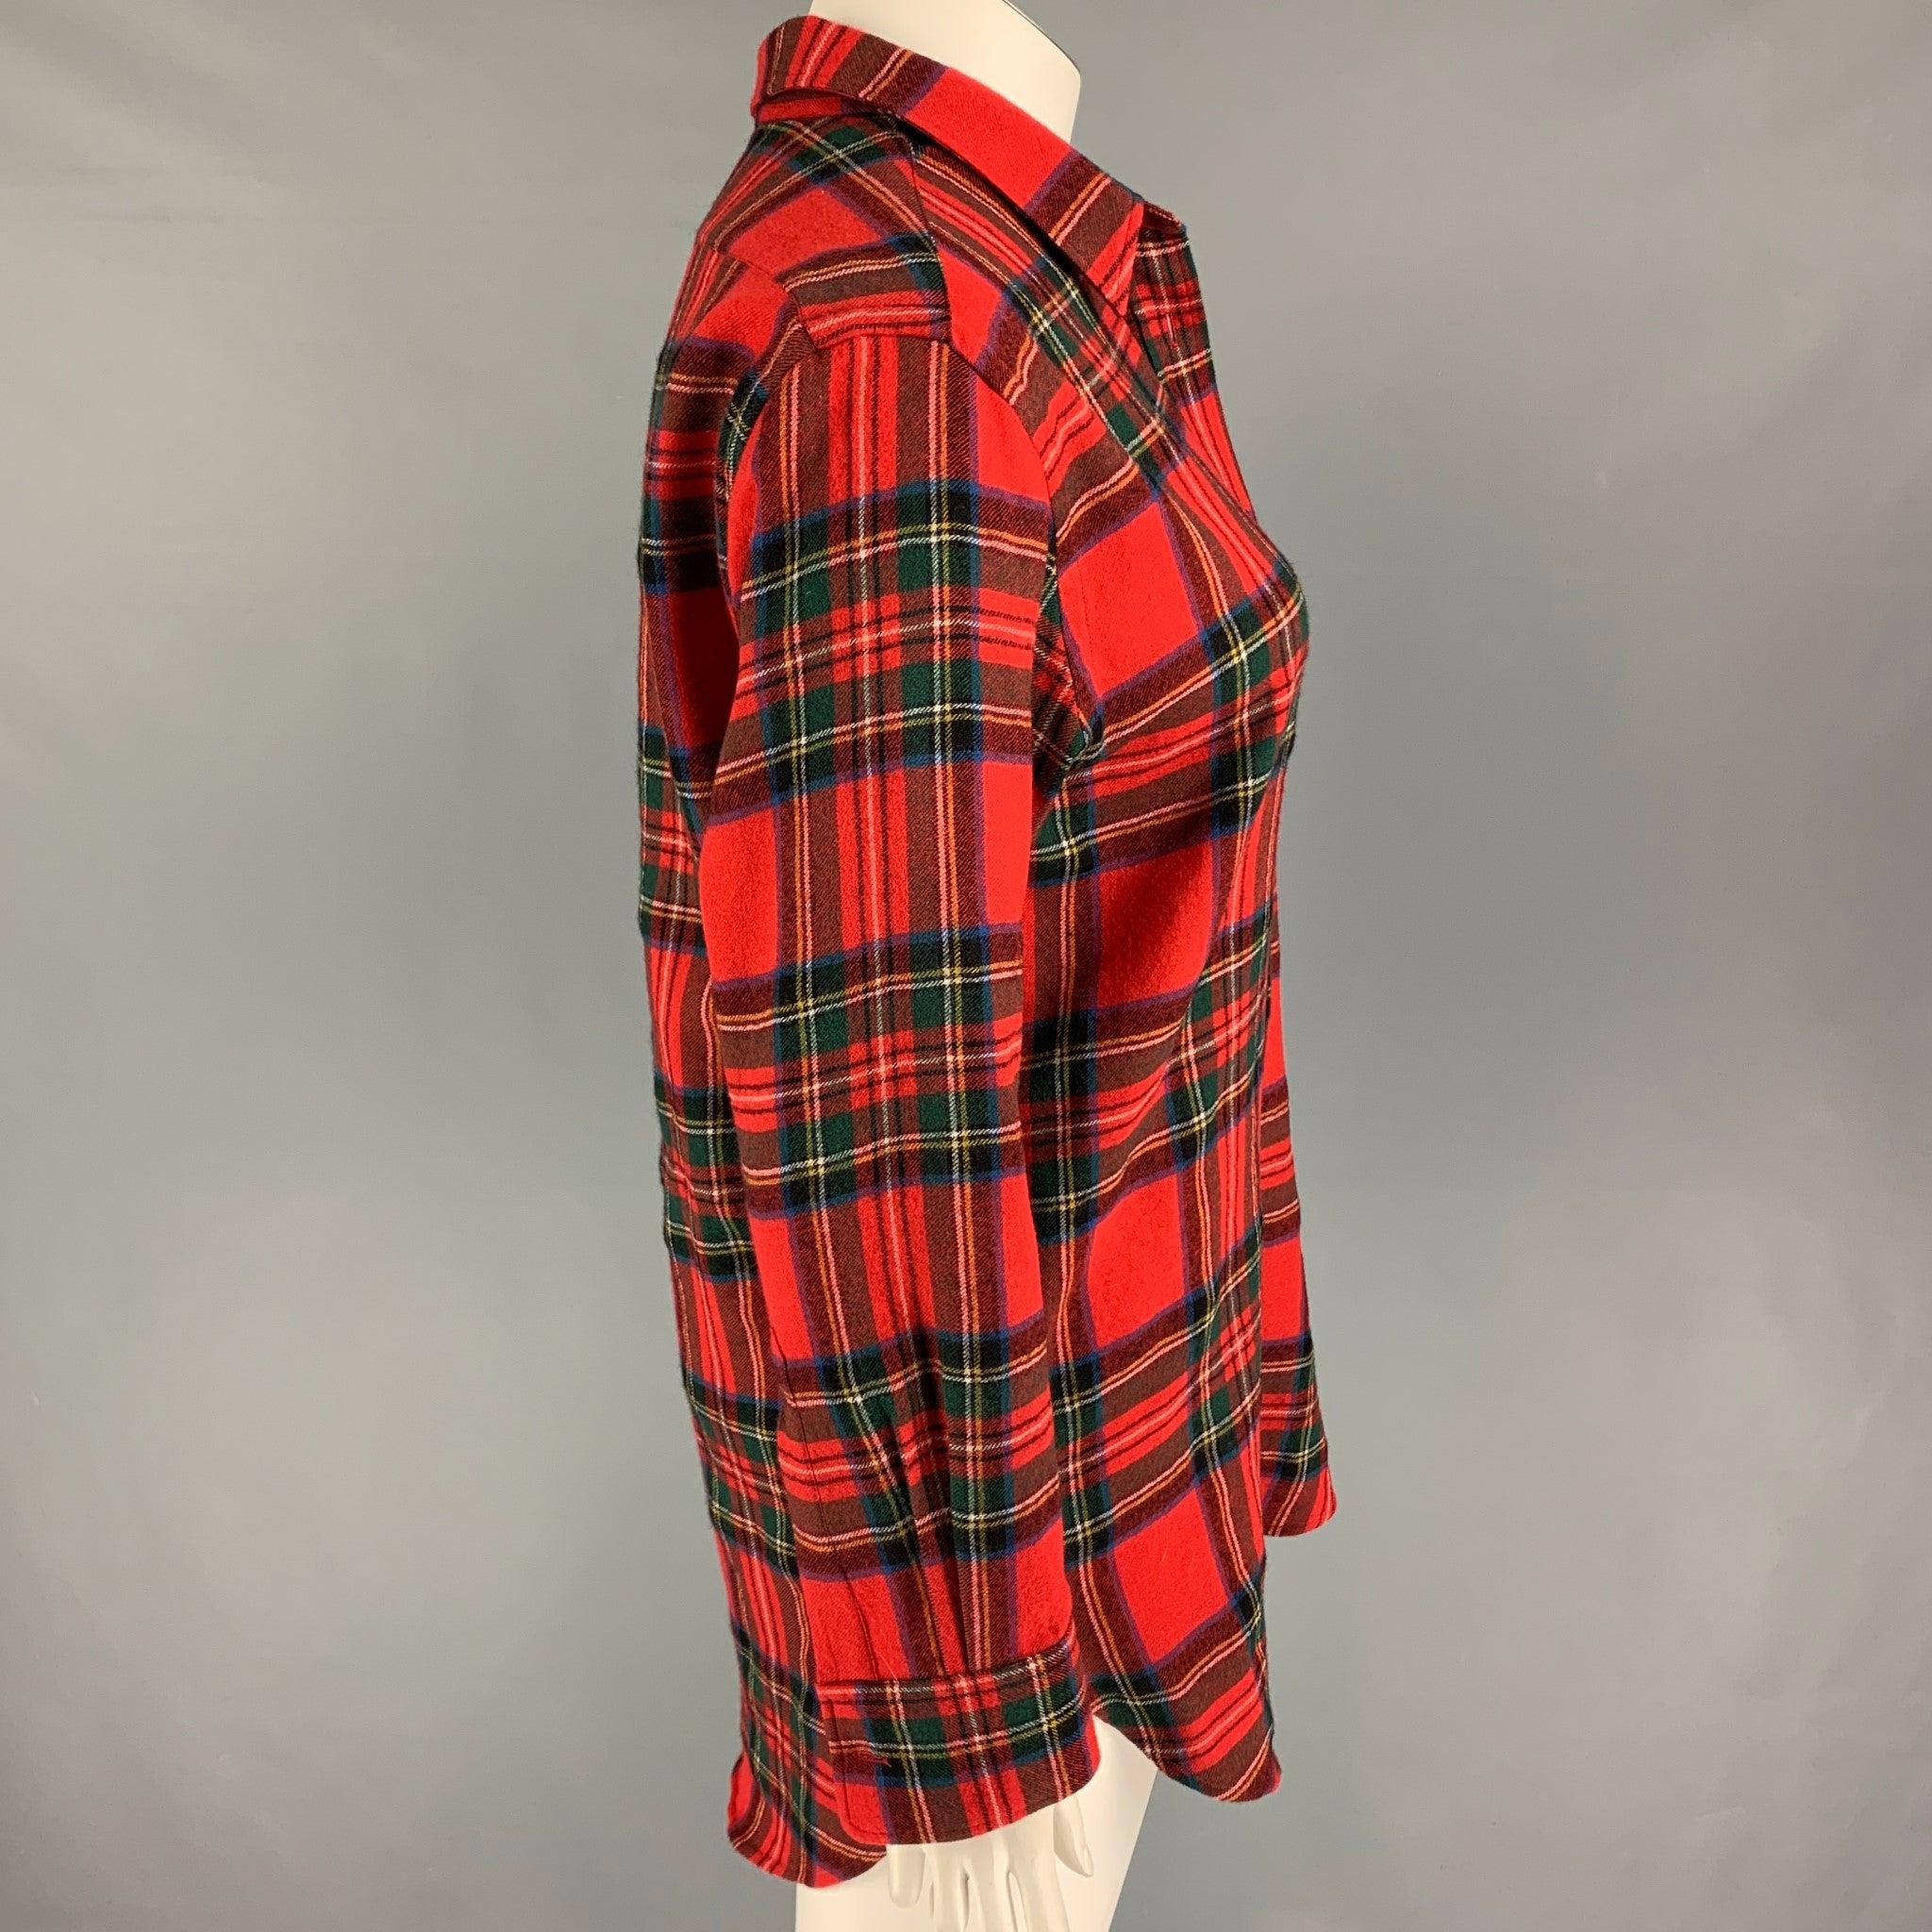 BURBERRY long sleeve shirt comes in a multi-color plaid wool featuring a spread collar, patch pocket, and a button up closure.
Very Good
Pre-Owned Condition. 

Marked:   UK 12 / US 10 / IT 44 

Measurements: 
 
Shoulder: 18 inches  Bust:
44 inches 